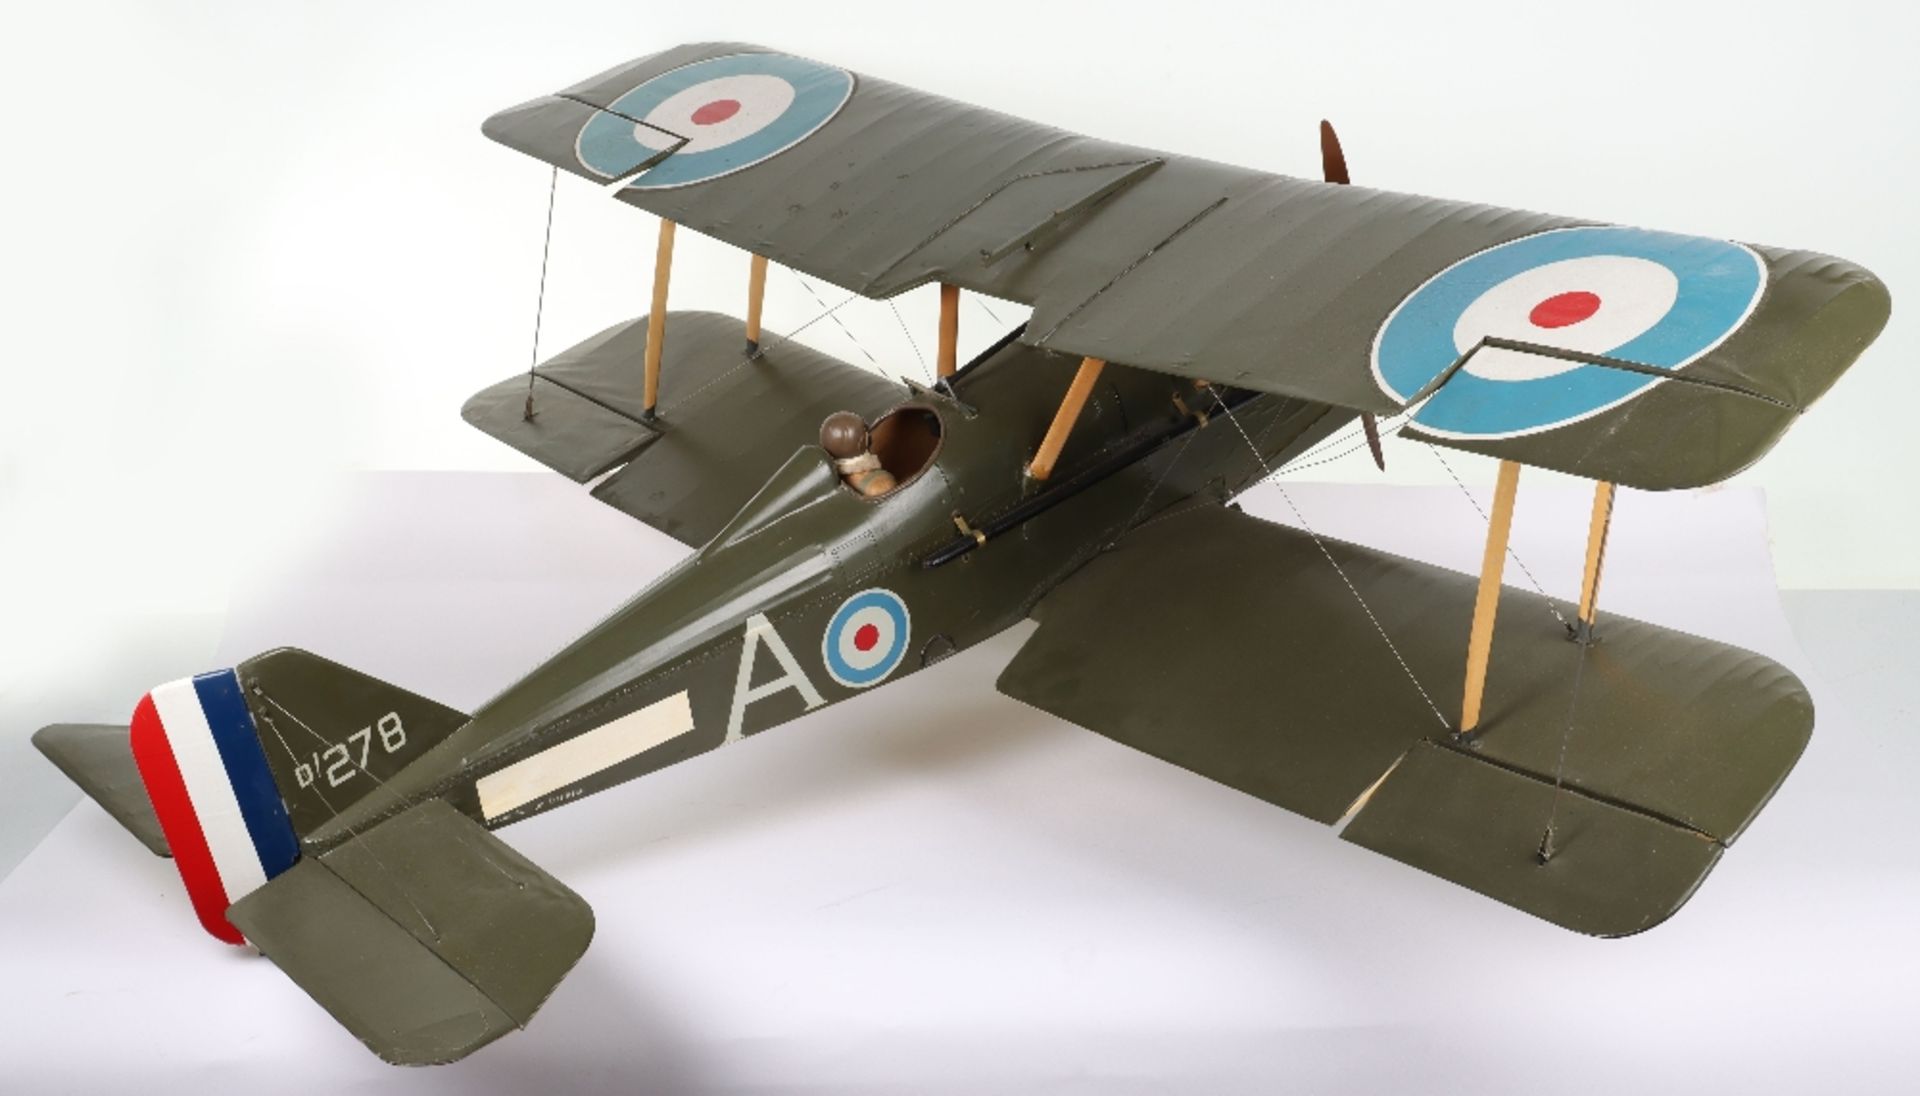 Impressive Working Model of a Royal Flying Corps SE5a Fighter Plane - Image 6 of 8